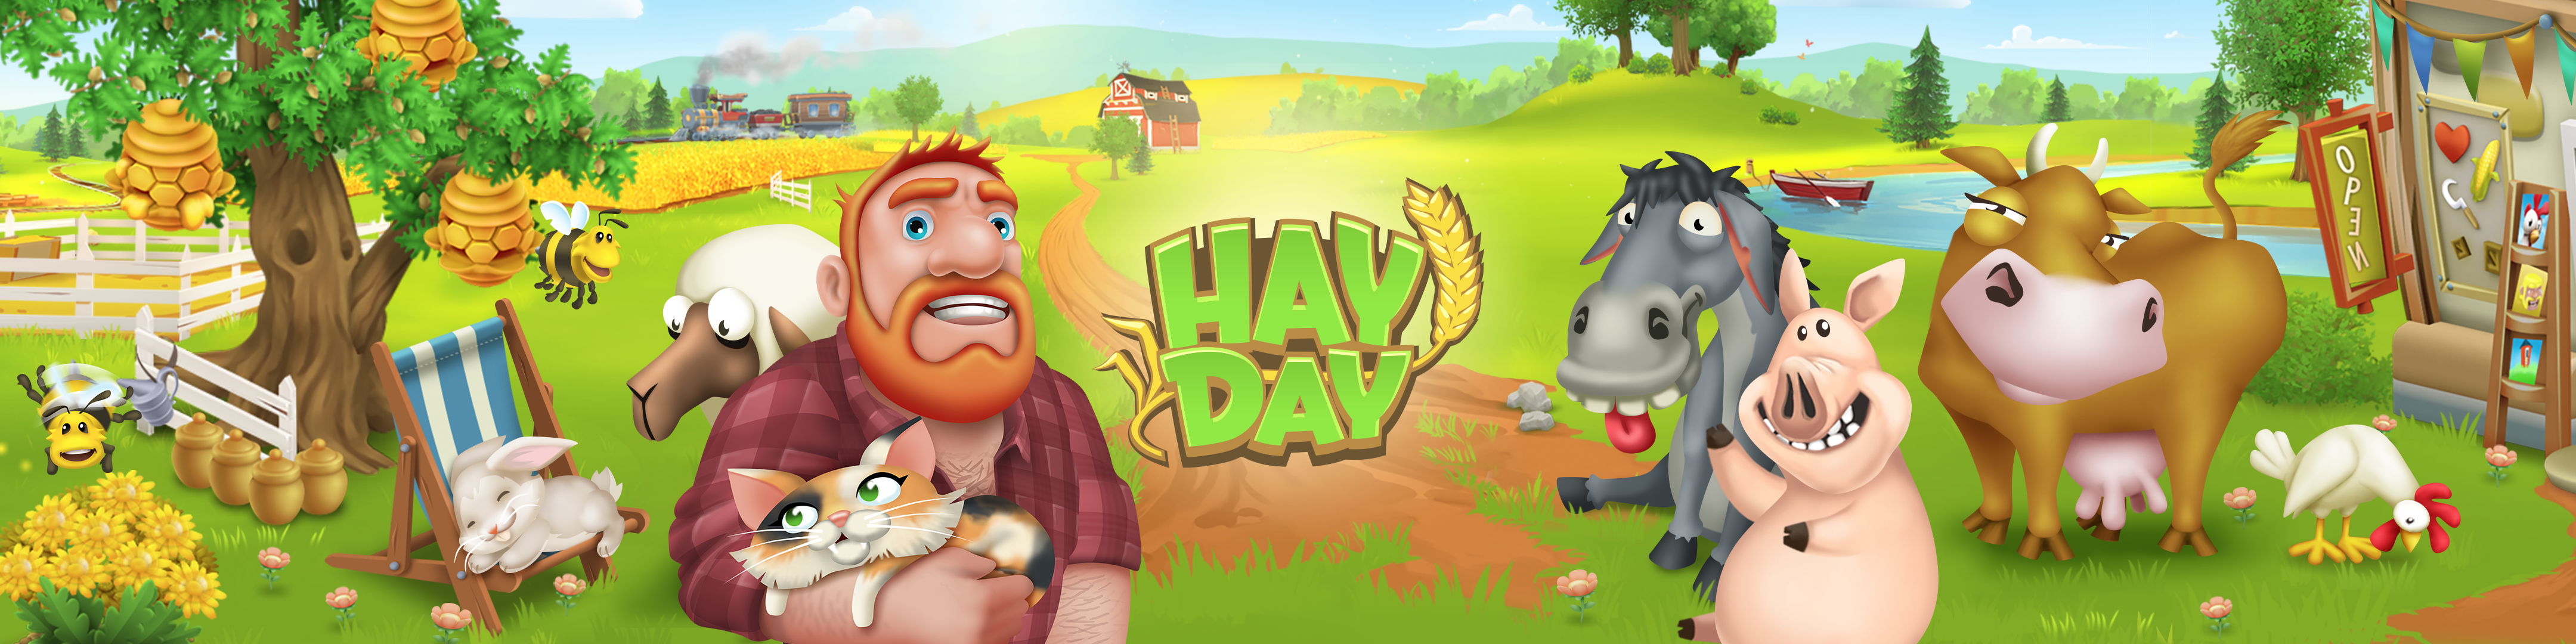 Hay Day Overview Apple App Store Australia - hay day roblox